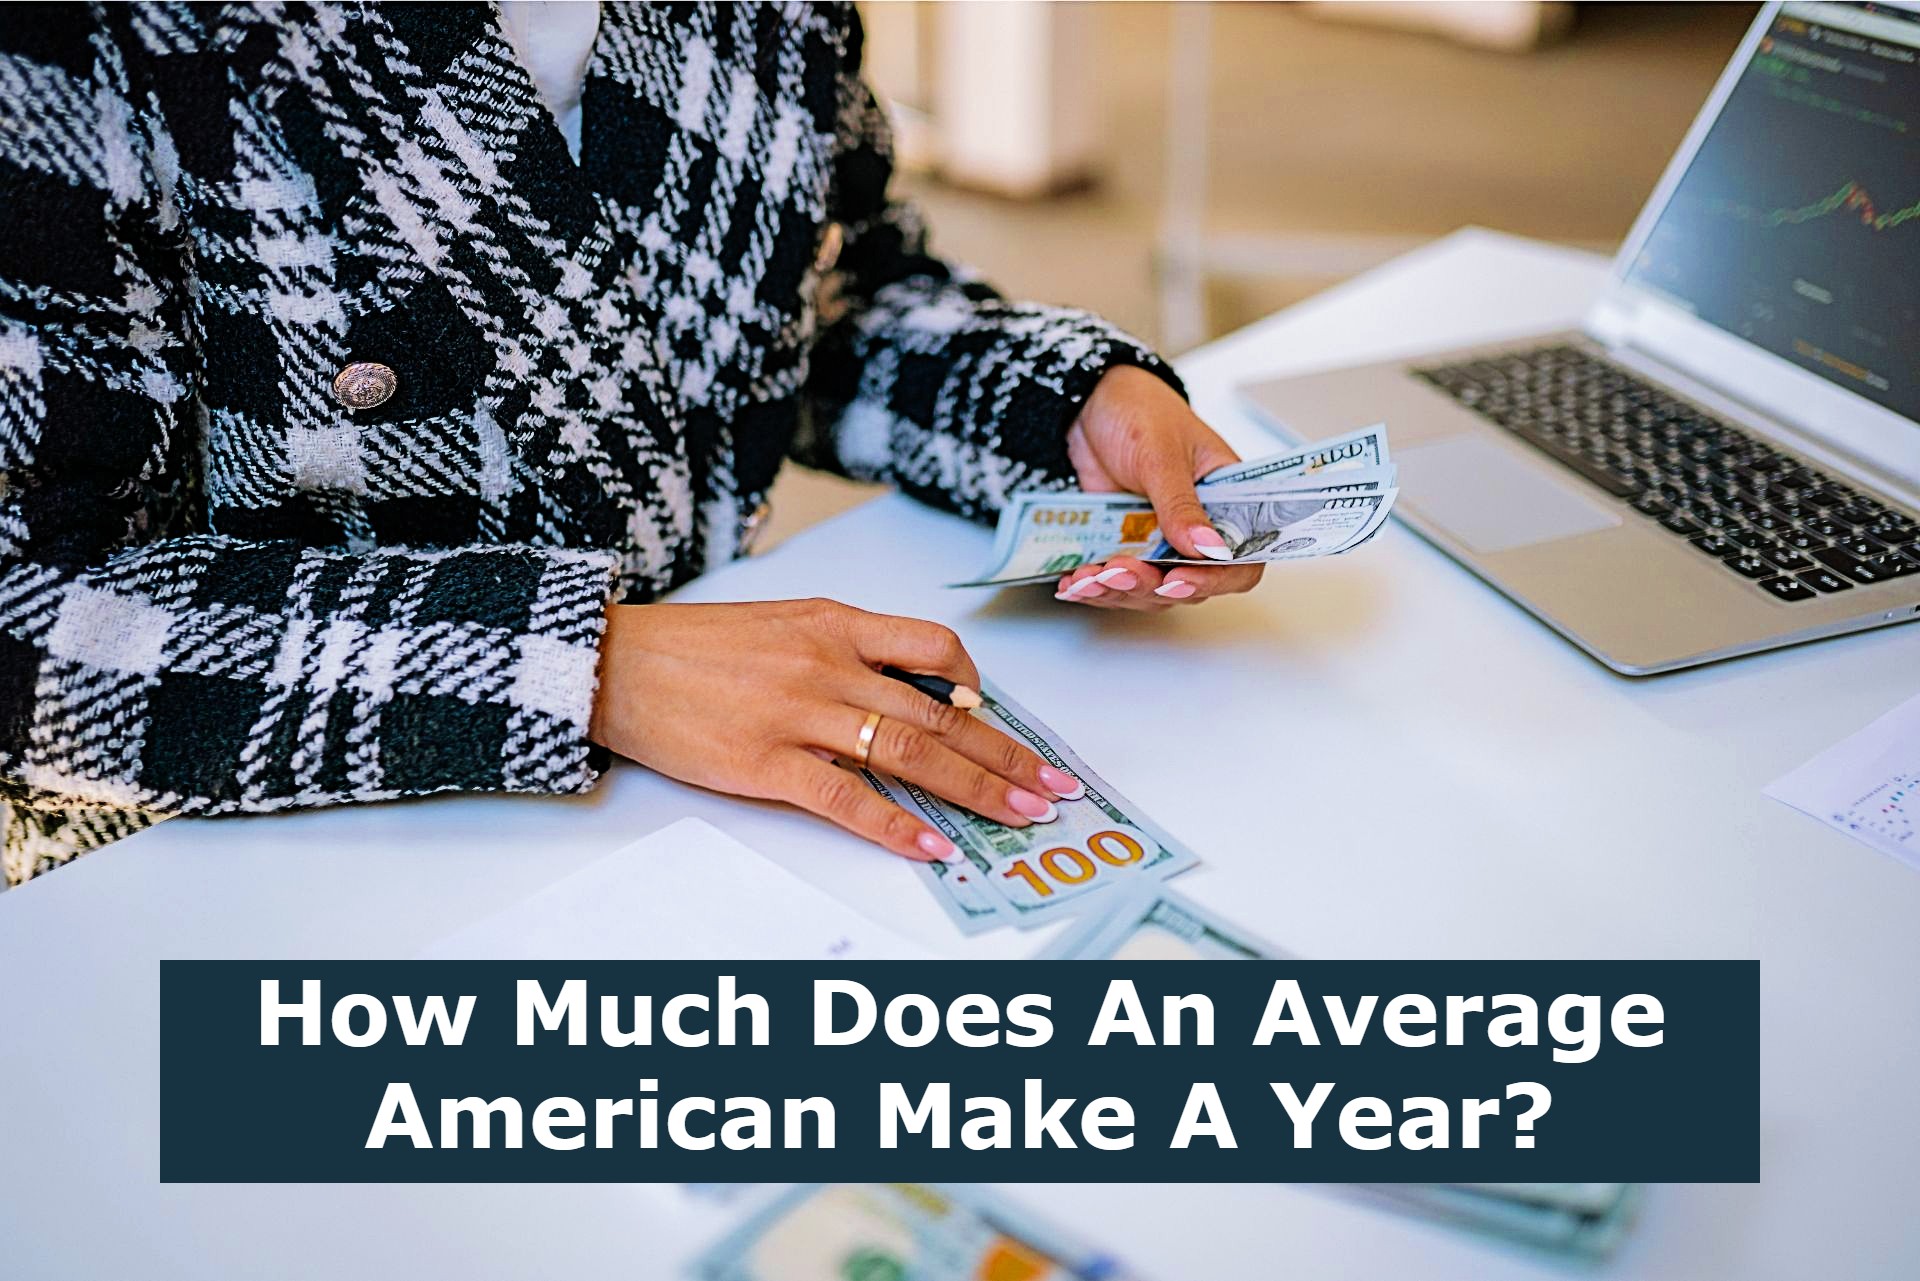 How Much Does An Average American Make A Year?